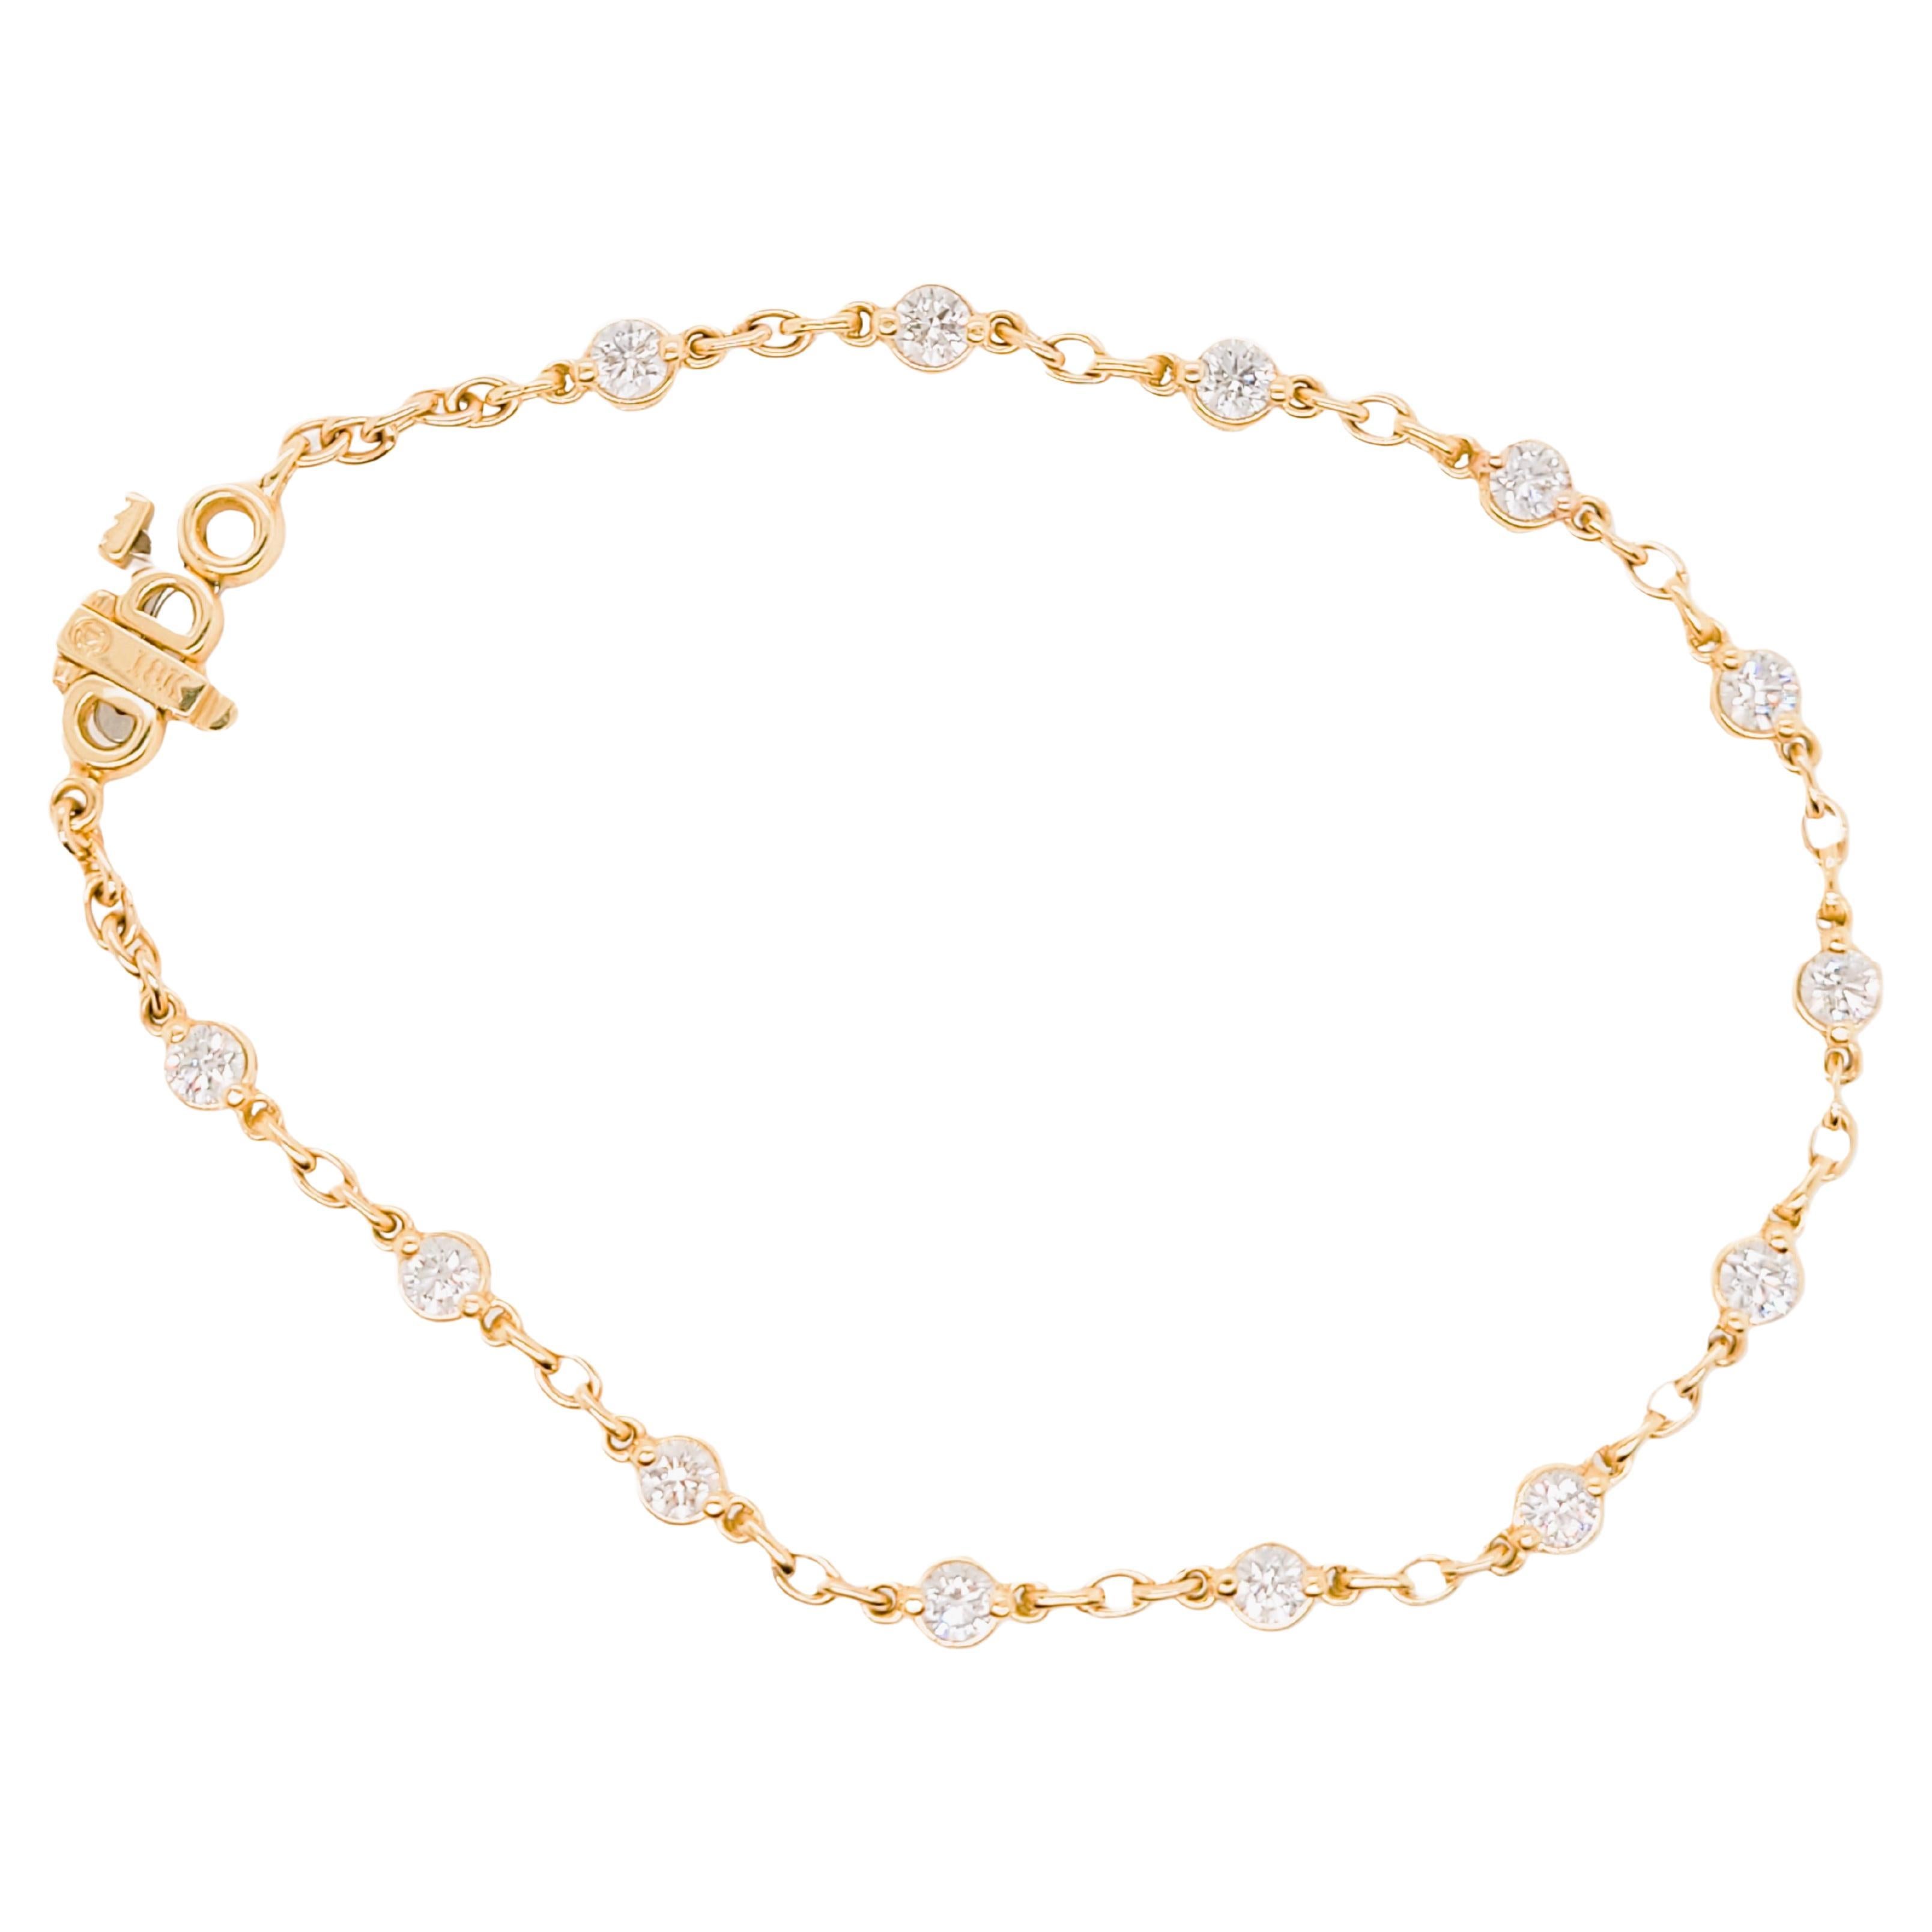 This is the bracelet you will wear every day and never take off!

Made with Italian, solid links of 18kt Rose gold, so this is not a dainty chain. I know by the photos it may look like the same type of chains like Diamonds by the yard, but this is